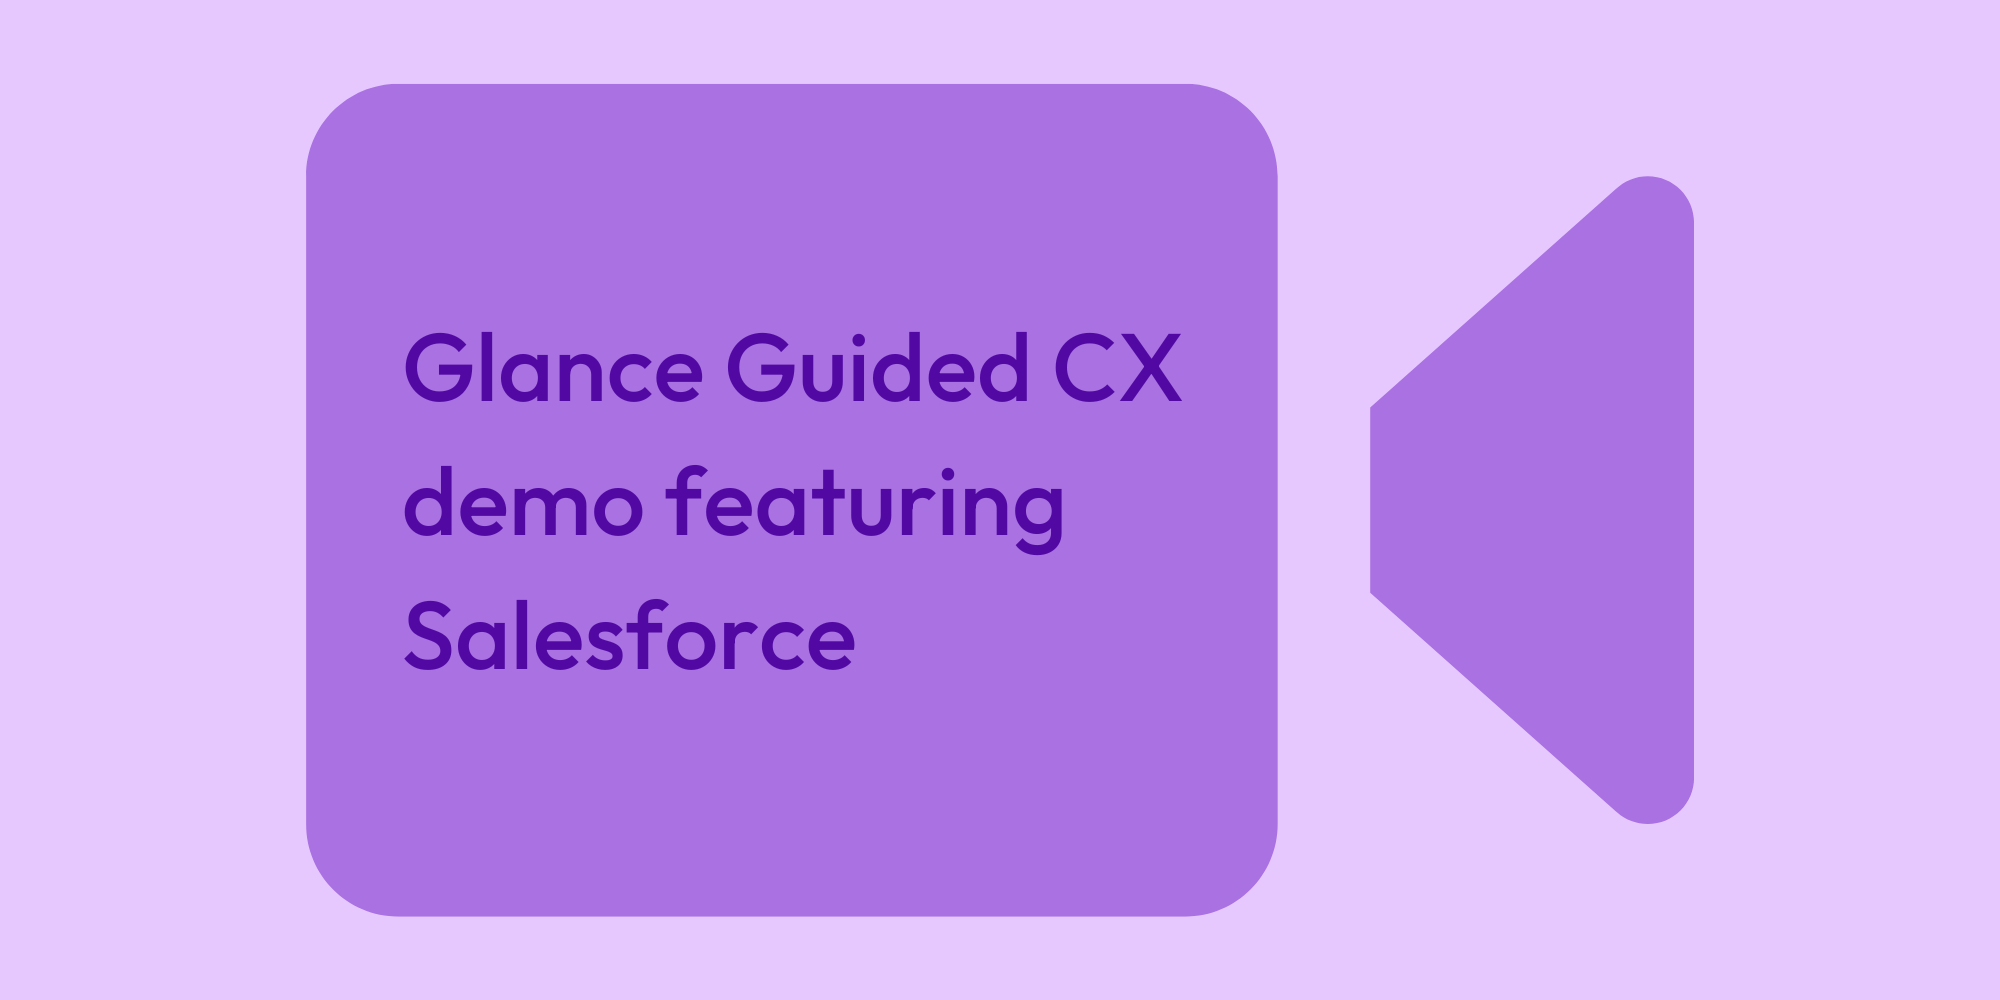 Glance Guided CX Demo